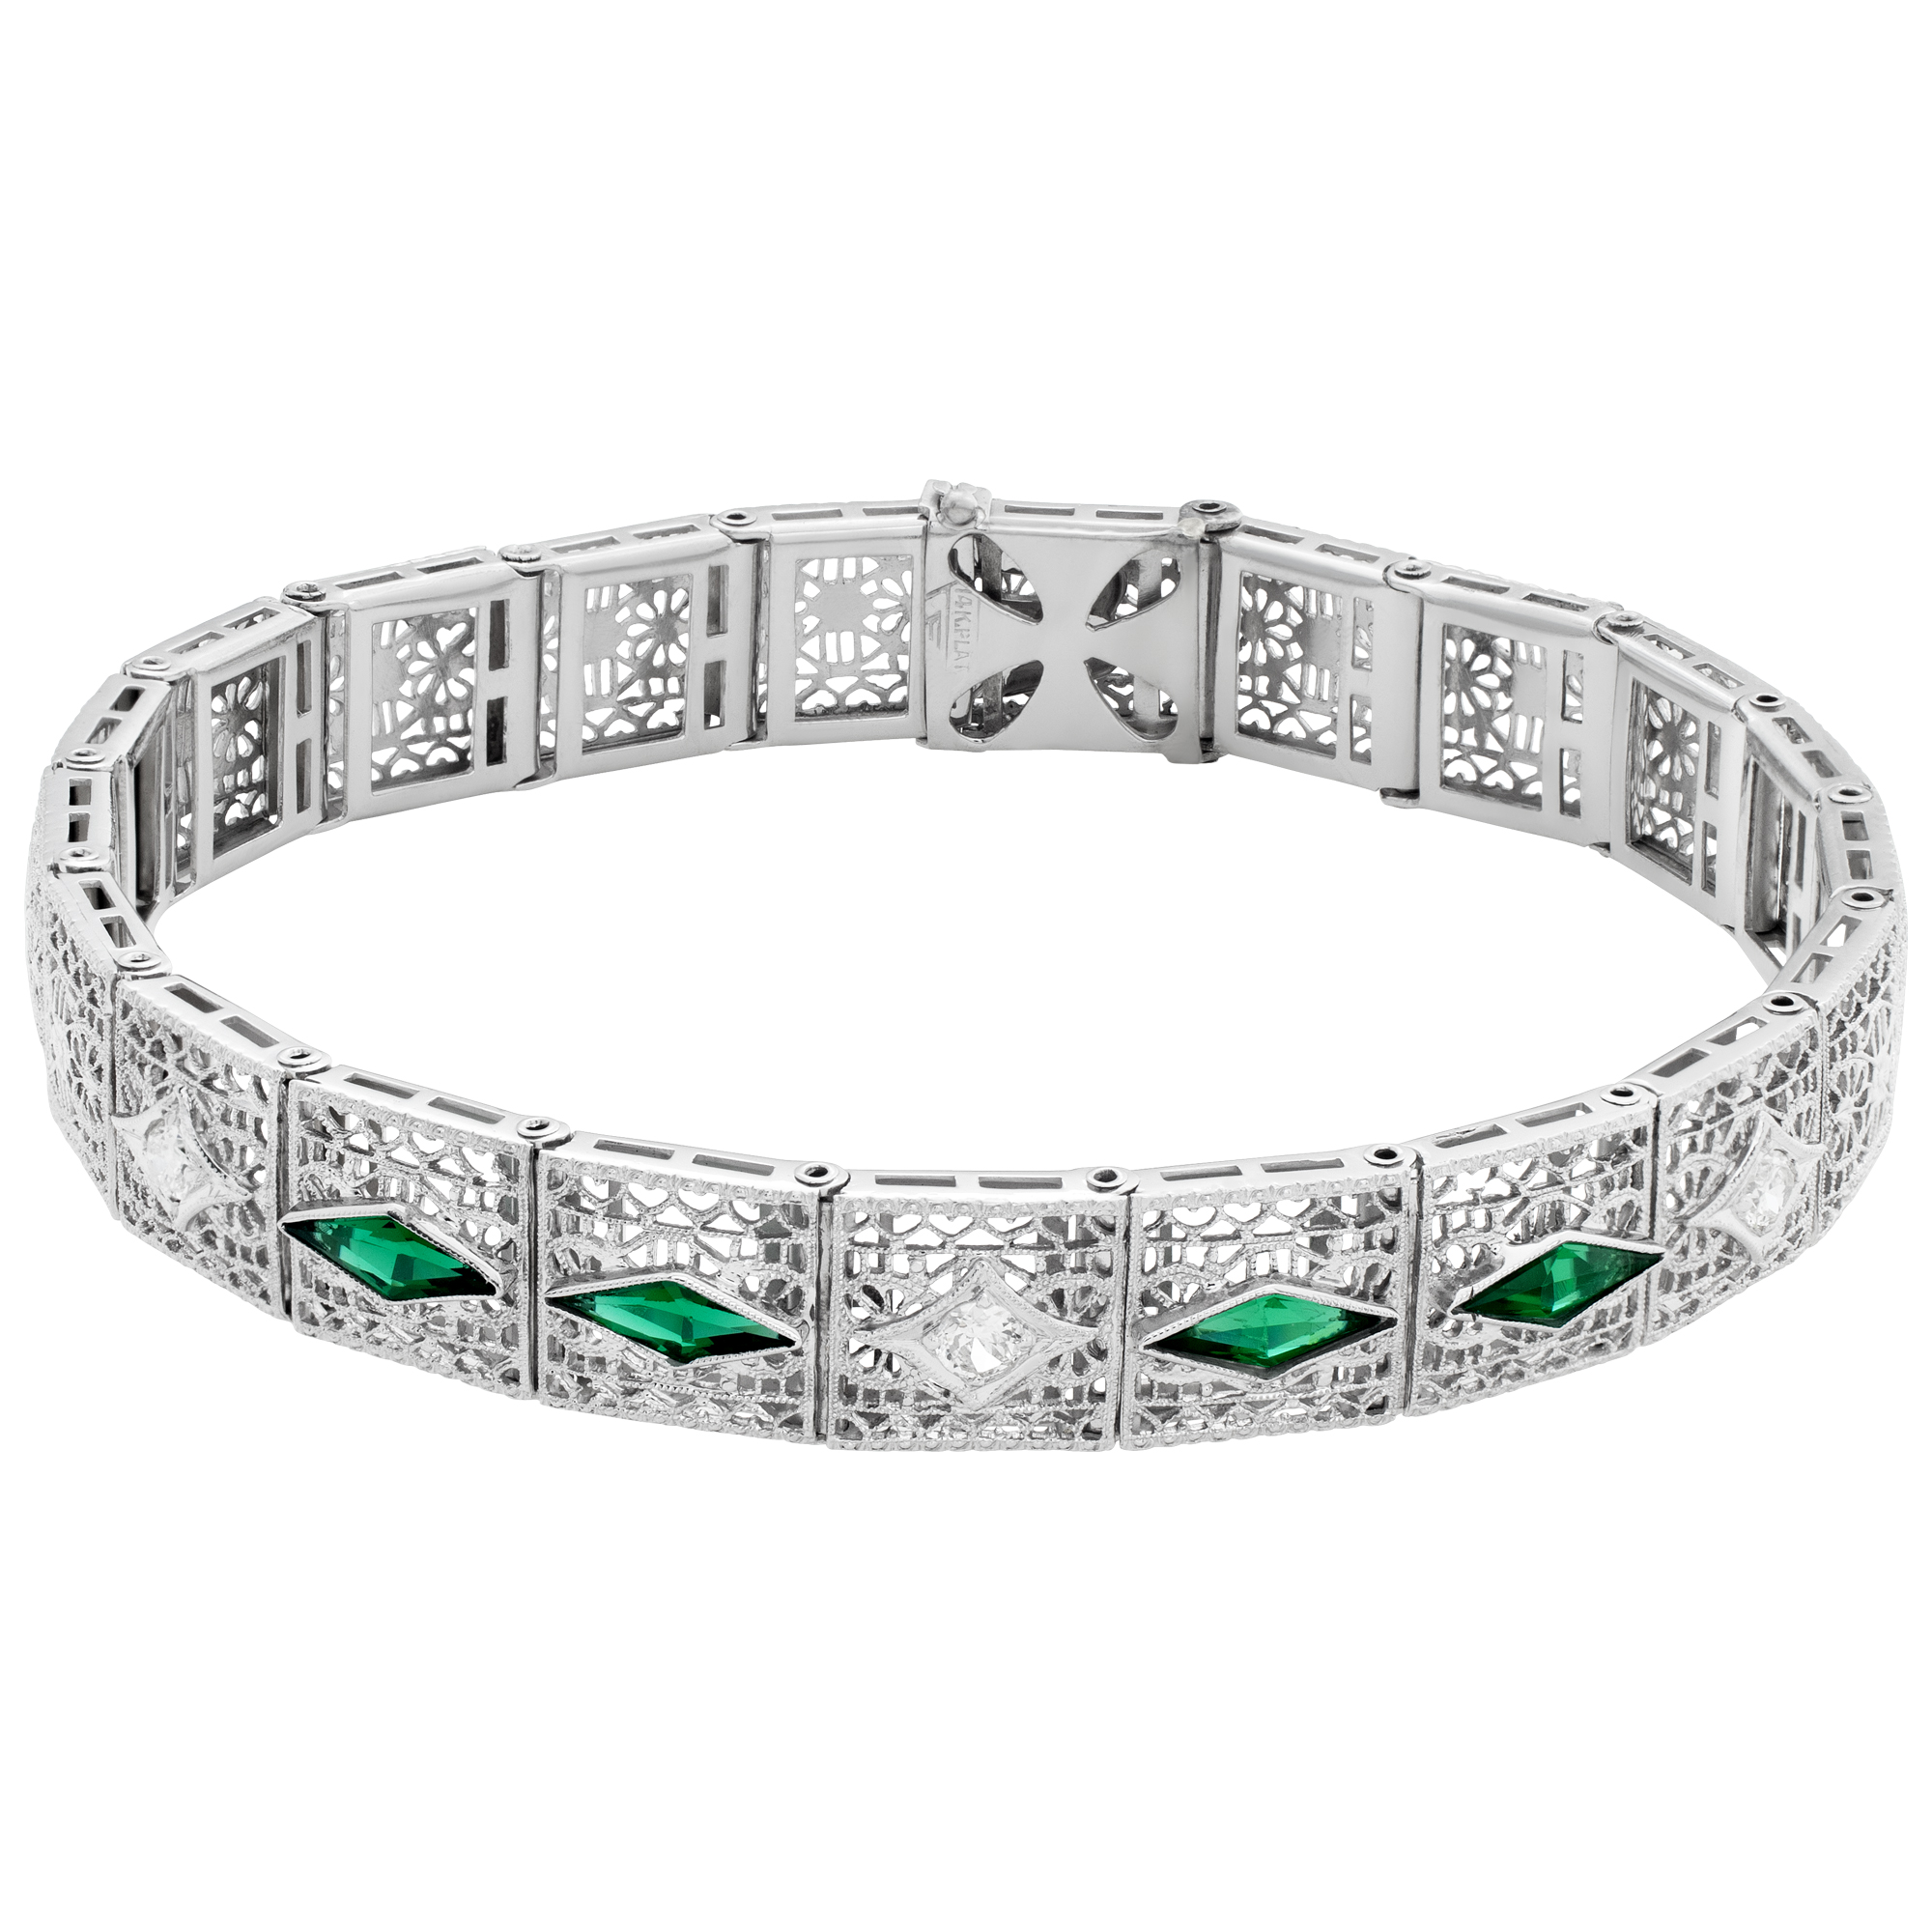 Edwardian filigree line bracelet with diamonds and synthetic emeralds set in 14k white gold, with platinum top. image 1